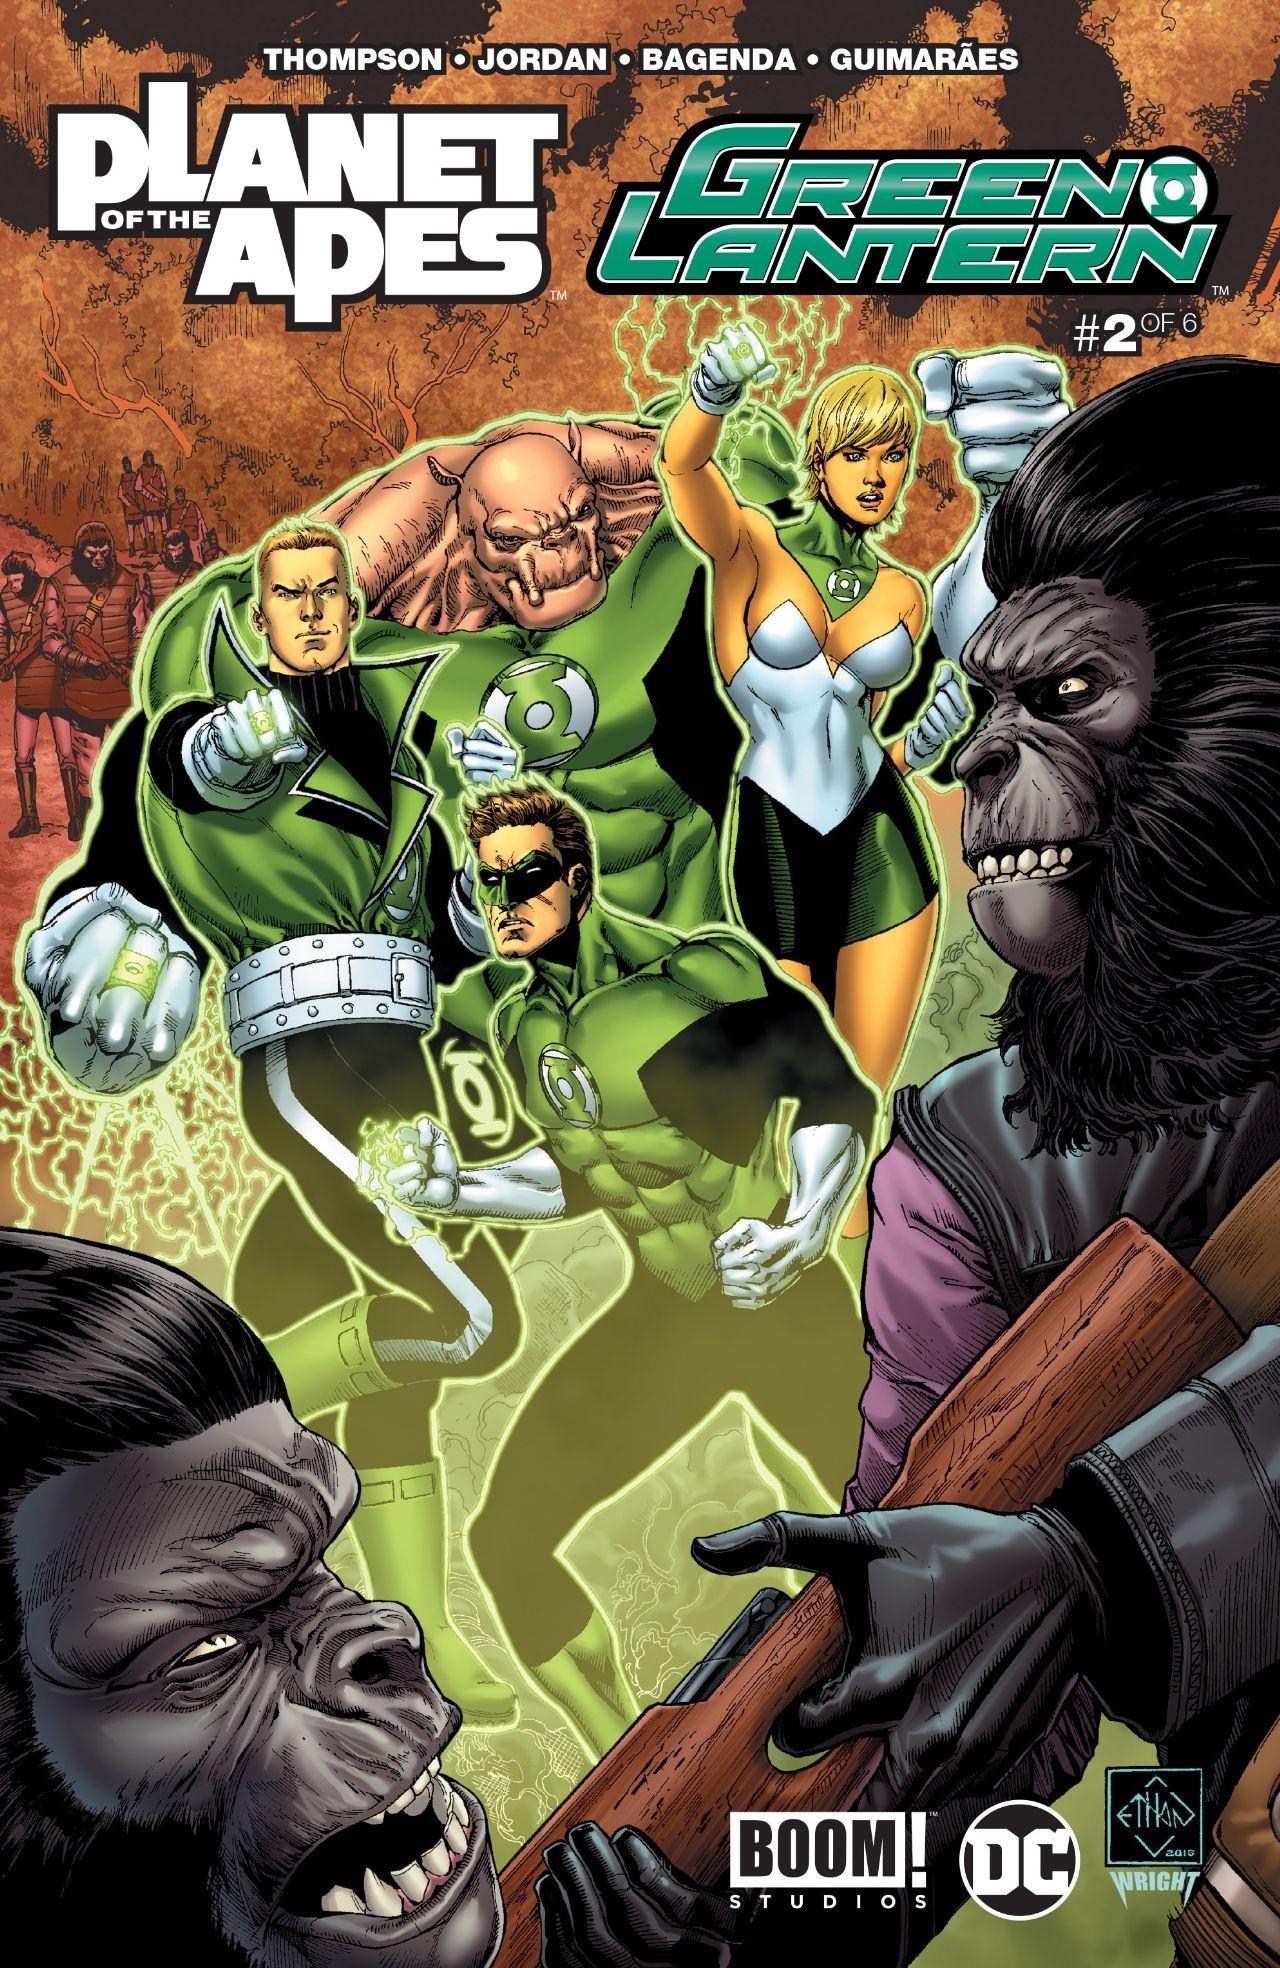 Planet of the Apes/Green Lantern Vol. 1 #2